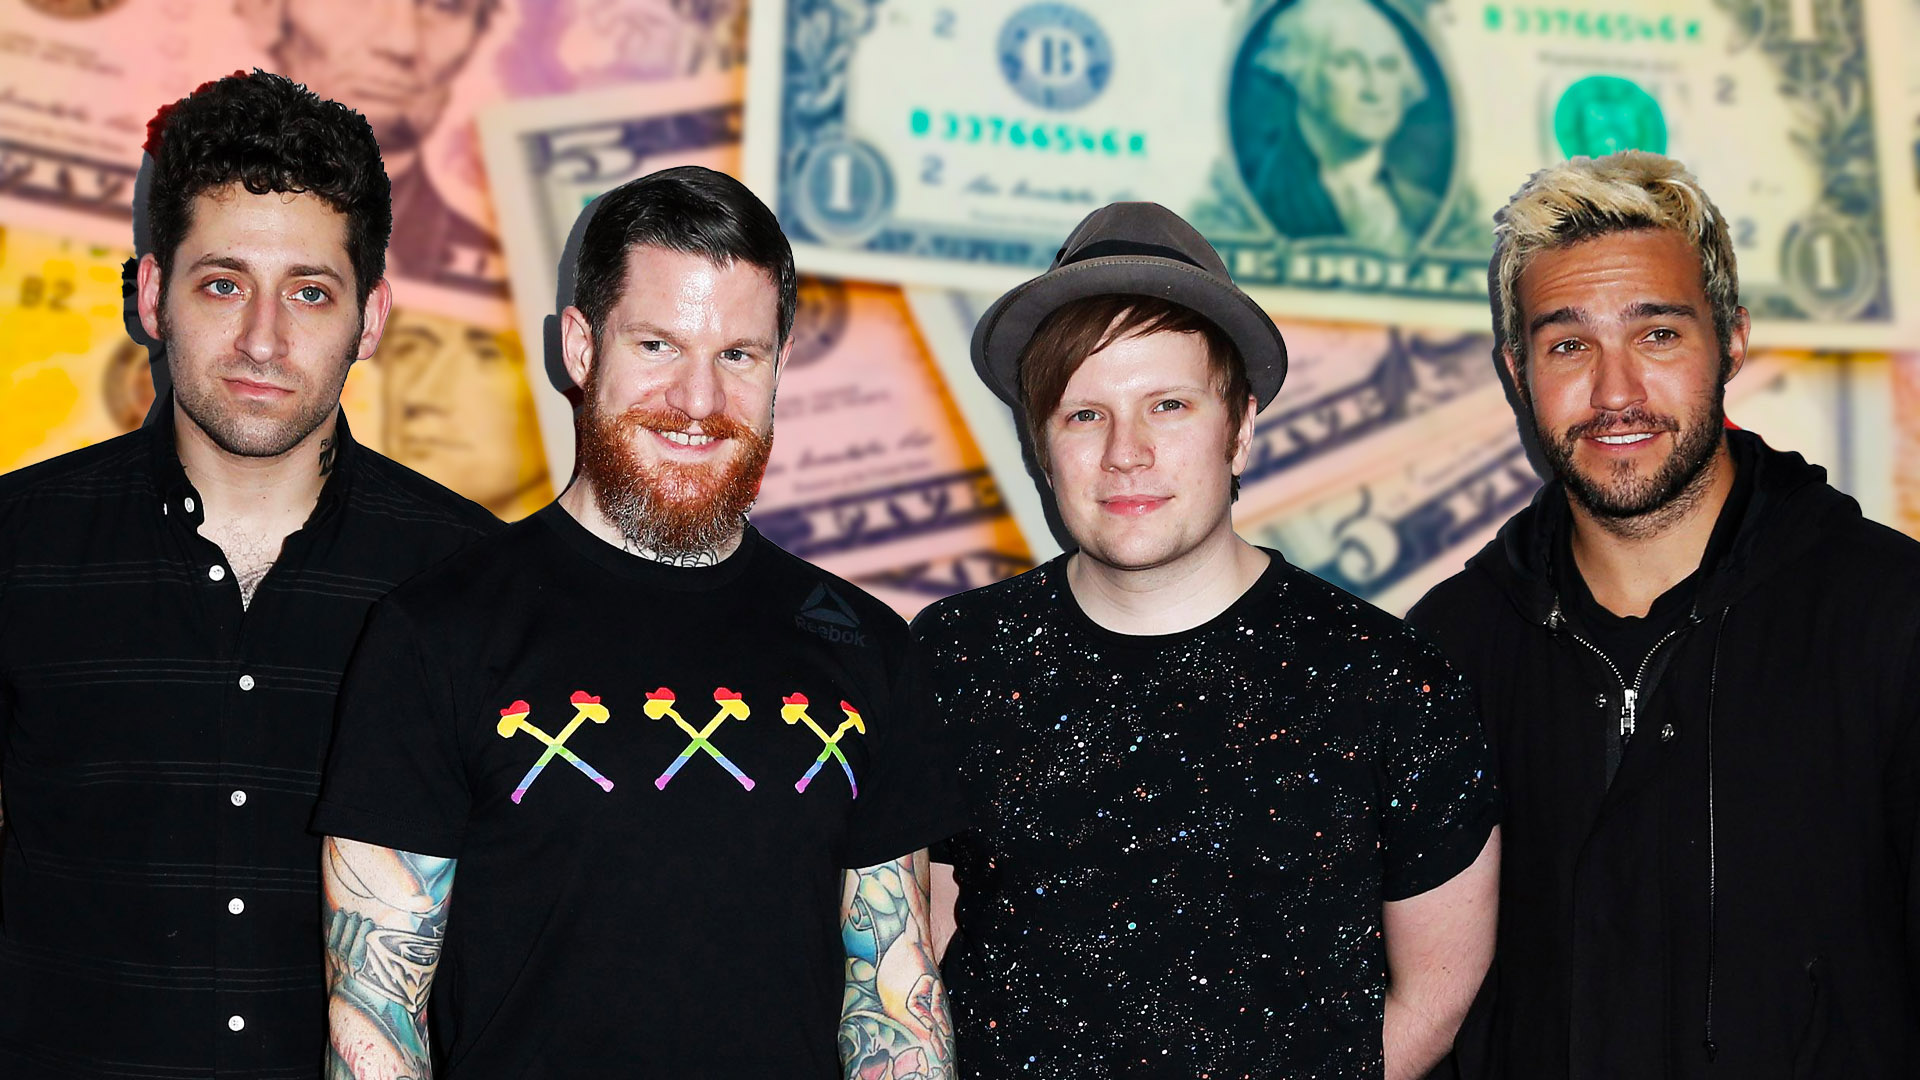 22 Years Later, Here's the Richest Member of Fall Out Boy